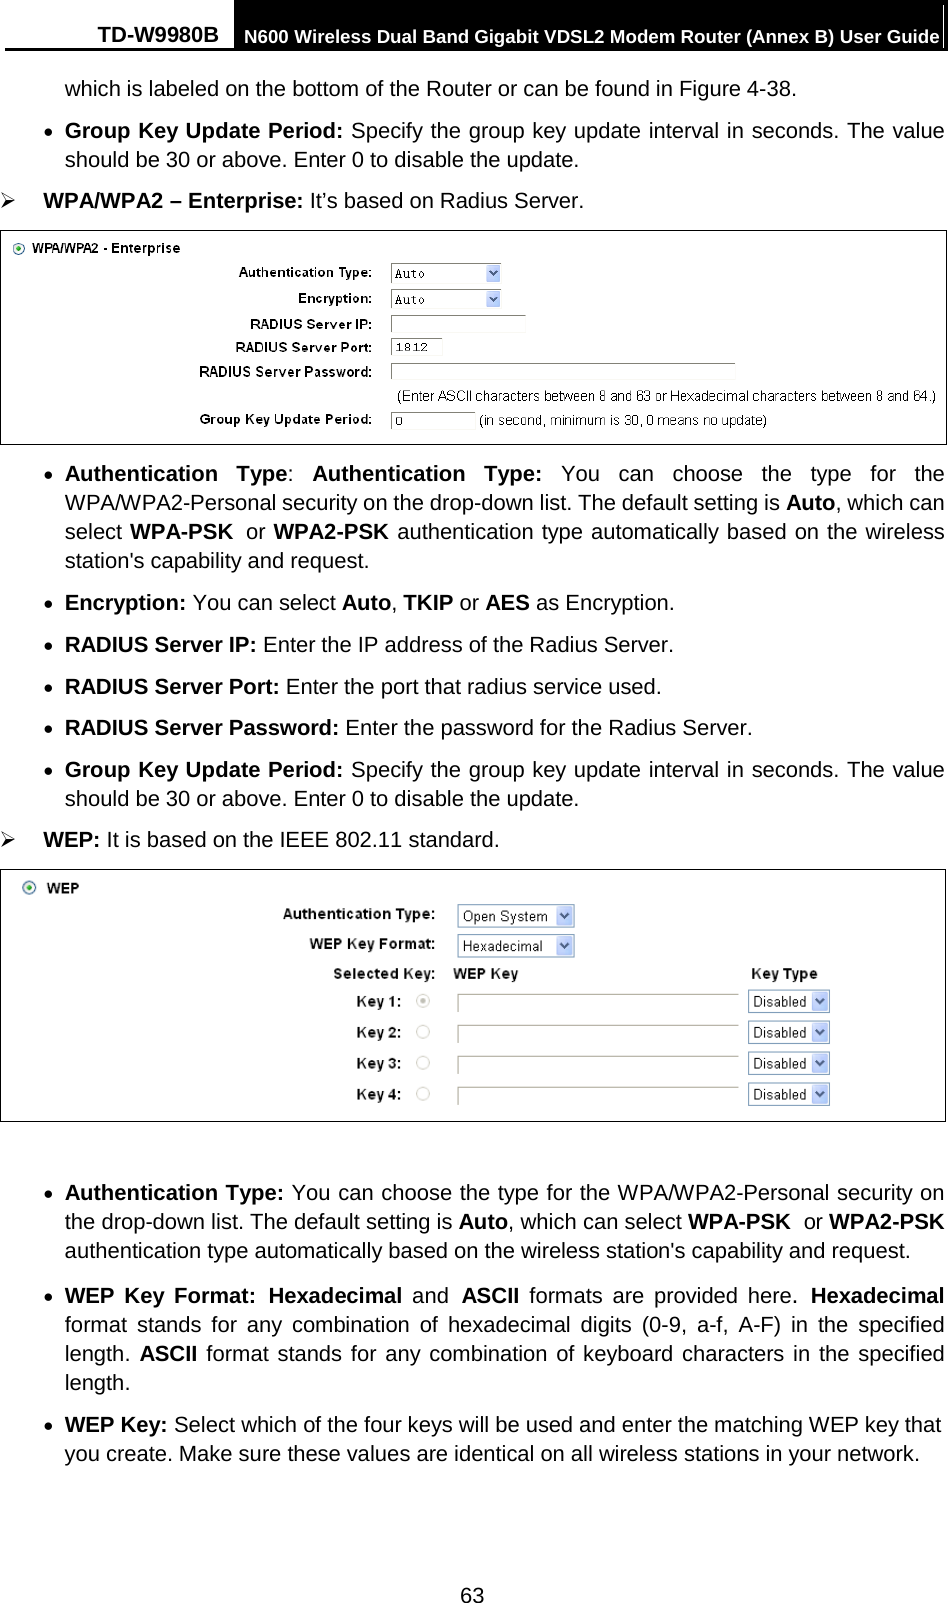 TD-W9980B N600 Wireless Dual Band Gigabit VDSL2 Modem Router (Annex B) User Guide  which is labeled on the bottom of the Router or can be found in Figure 4-38. • Group Key Update Period: Specify the group key update interval in seconds. The value should be 30 or above. Enter 0 to disable the update.  WPA/WPA2 – Enterprise: It’s based on Radius Server.  • Authentication  Type:  Authentication  Type:  You can choose the type for the WPA/WPA2-Personal security on the drop-down list. The default setting is Auto, which can select WPA-PSK or WPA2-PSK authentication type automatically based on the wireless station&apos;s capability and request. • Encryption: You can select Auto, TKIP or AES as Encryption. • RADIUS Server IP: Enter the IP address of the Radius Server. • RADIUS Server Port: Enter the port that radius service used. • RADIUS Server Password: Enter the password for the Radius Server. • Group Key Update Period: Specify the group key update interval in seconds. The value should be 30 or above. Enter 0 to disable the update.  WEP: It is based on the IEEE 802.11 standard.     • Authentication Type: You can choose the type for the WPA/WPA2-Personal security on the drop-down list. The default setting is Auto, which can select WPA-PSK or WPA2-PSK authentication type automatically based on the wireless station&apos;s capability and request. • WEP Key Format: Hexadecimal and ASCII  formats are provided here. Hexadecimal format stands for any combination of hexadecimal digits (0-9, a-f, A-F) in the specified length. ASCII format stands for any combination of keyboard characters in the specified length.   • WEP Key: Select which of the four keys will be used and enter the matching WEP key that you create. Make sure these values are identical on all wireless stations in your network.   63 